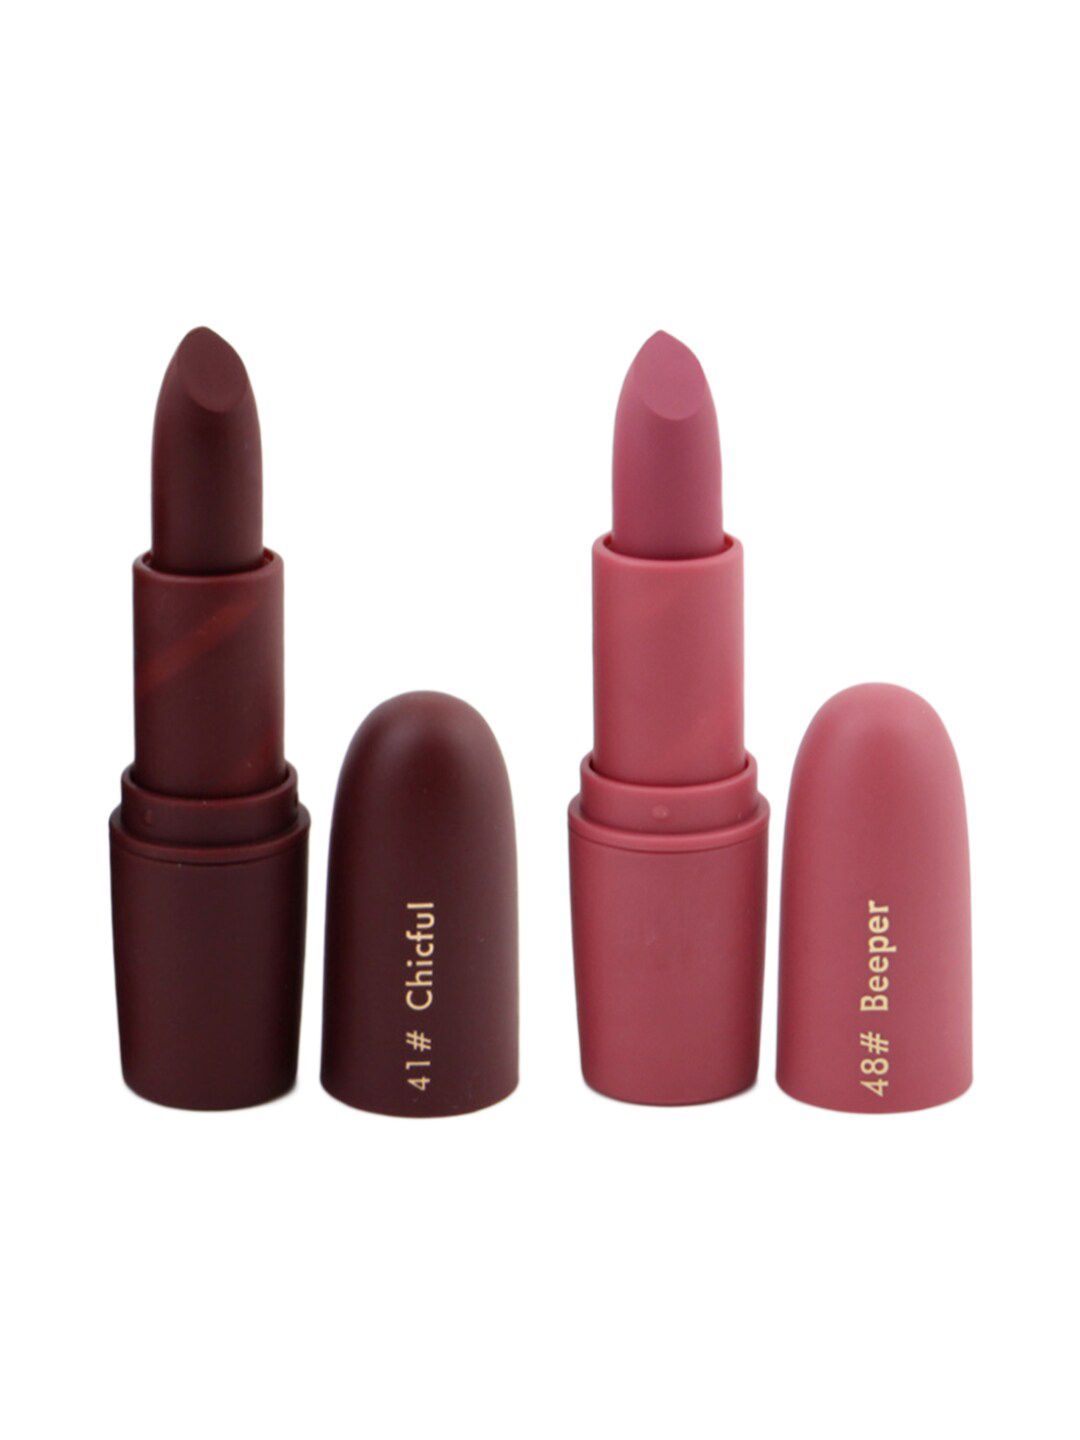 MISS ROSE Professional Make-Up Set of 2 Matte Creamy Lipsticks - Chicful 41 & Beeper 48 Price in India